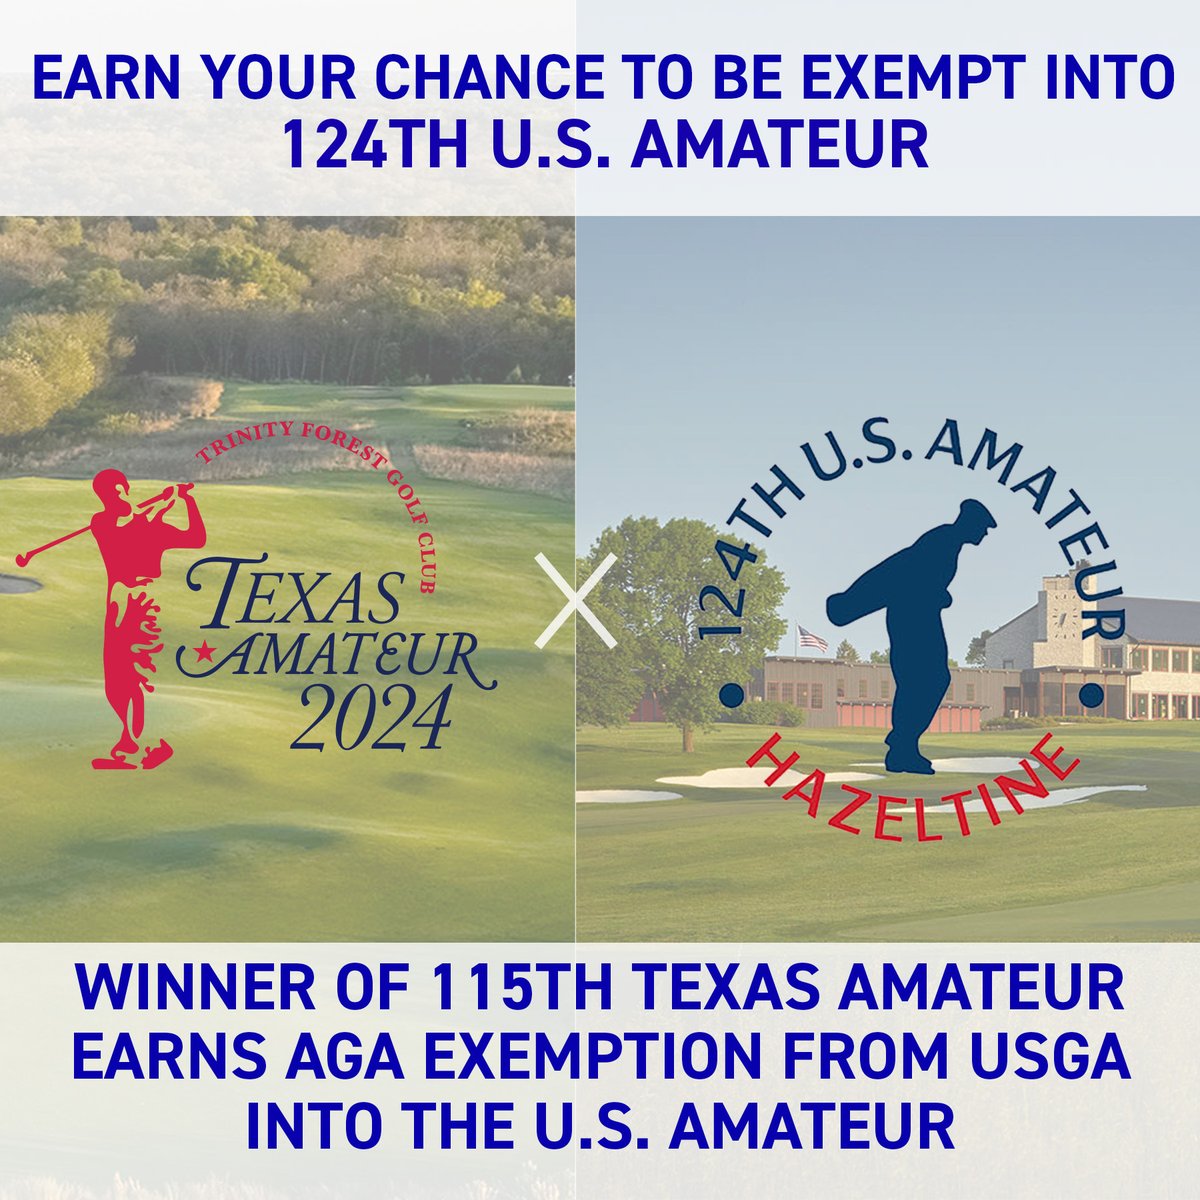 Just 5 days left until Texas Amateur qualifying closes! The winner of this year's 115th Texas Amateur will receive an exemption into the 124th U.S. Amateur at @Hazeltine. Don't miss out on your chance! Register here - bit.ly/3TlN4GK